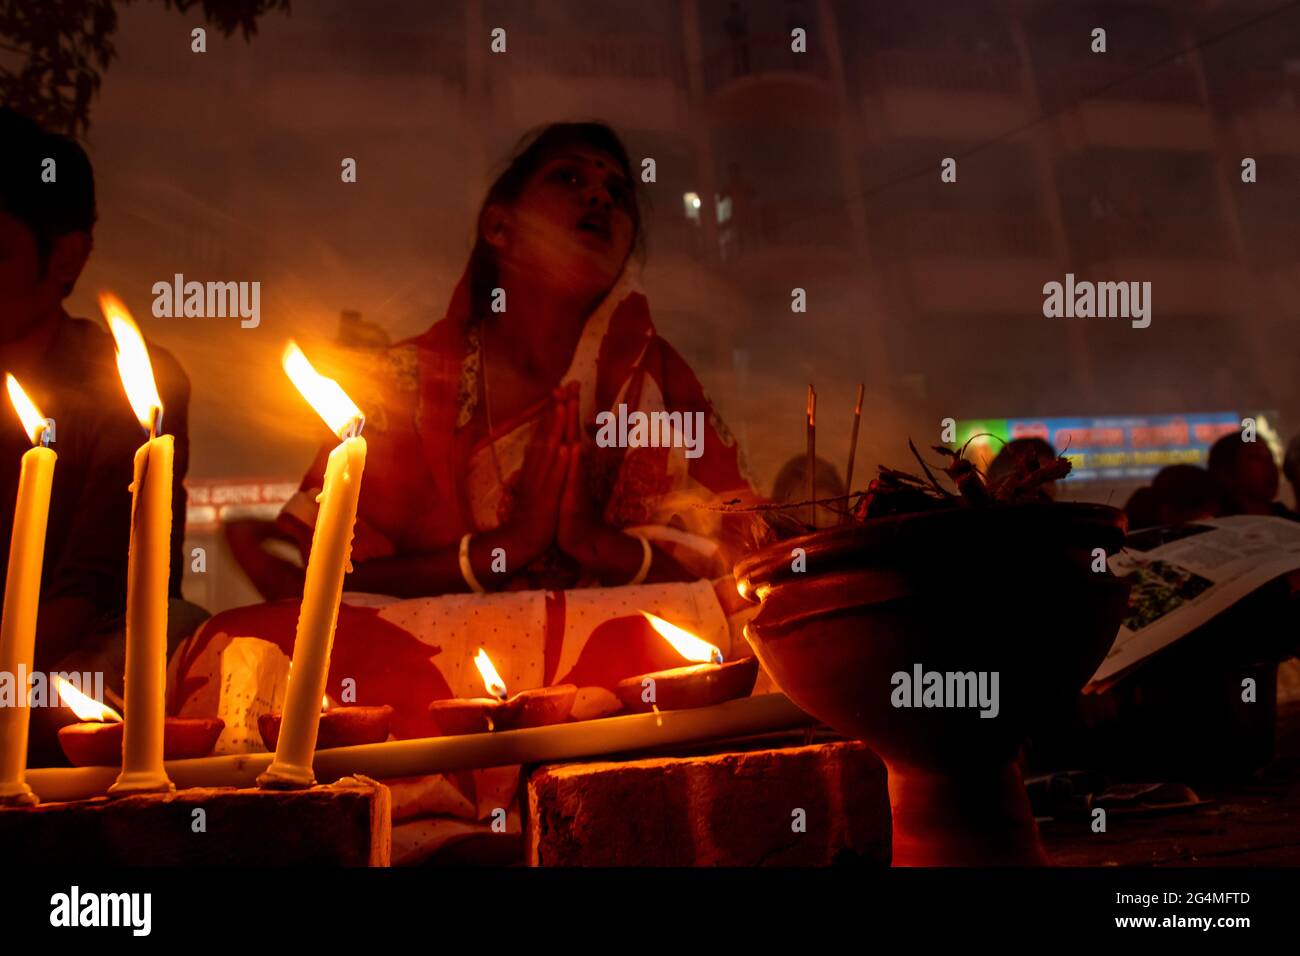 The biggest ritual activity of Hinduism, it's called Rakher upobas, all Hindus participate in these religious events every year. I captured this image Stock Photo